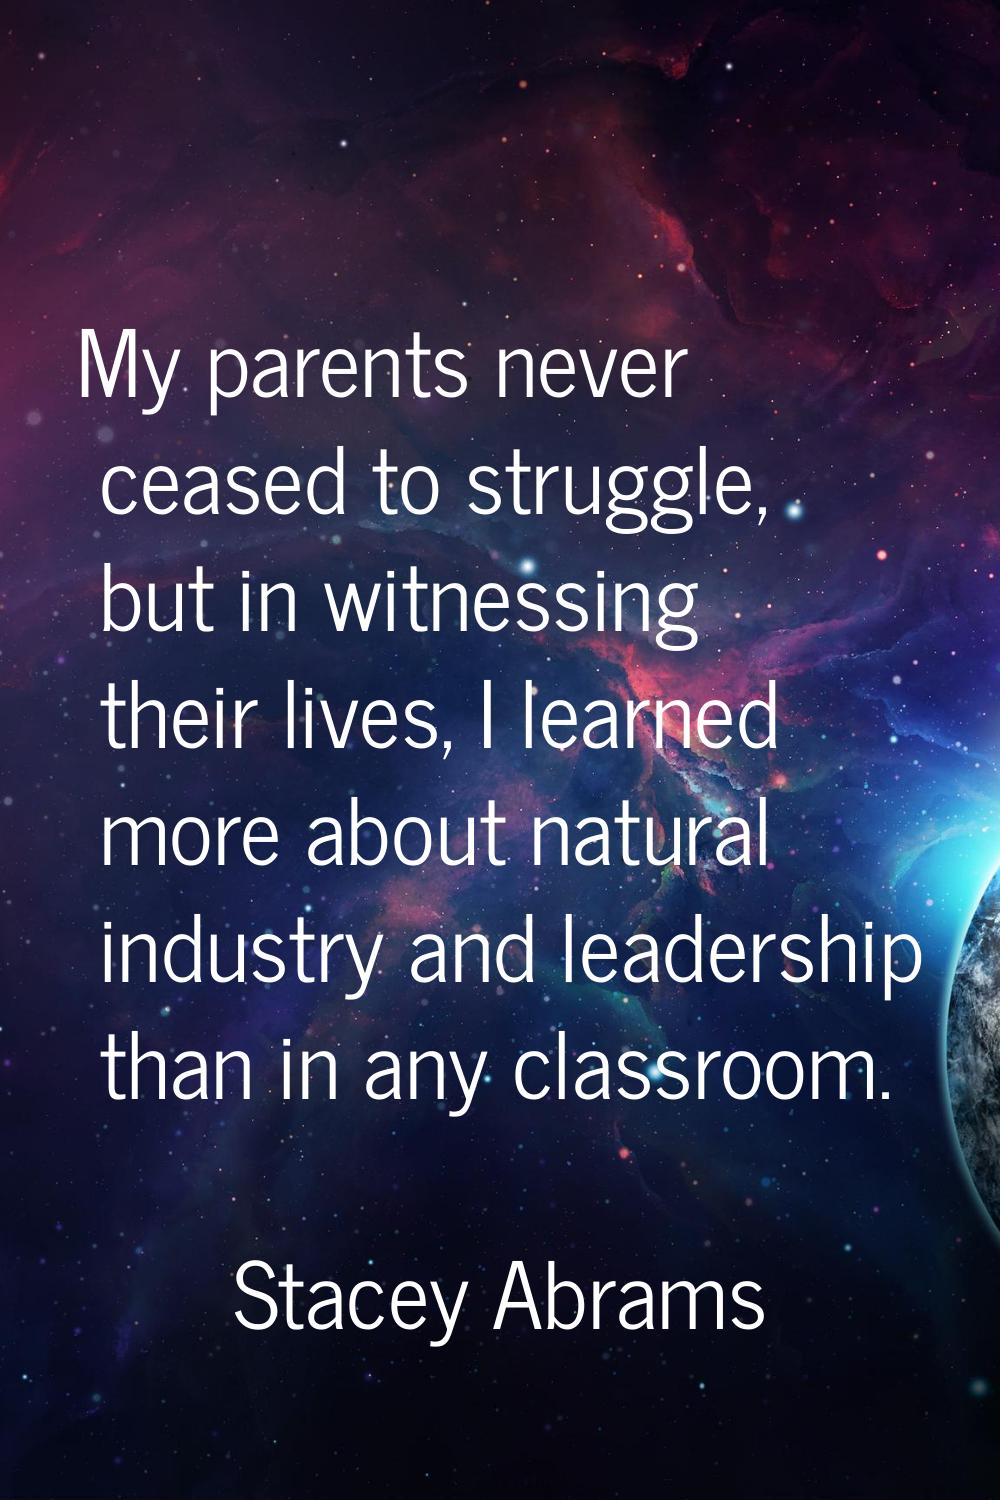 My parents never ceased to struggle, but in witnessing their lives, I learned more about natural in